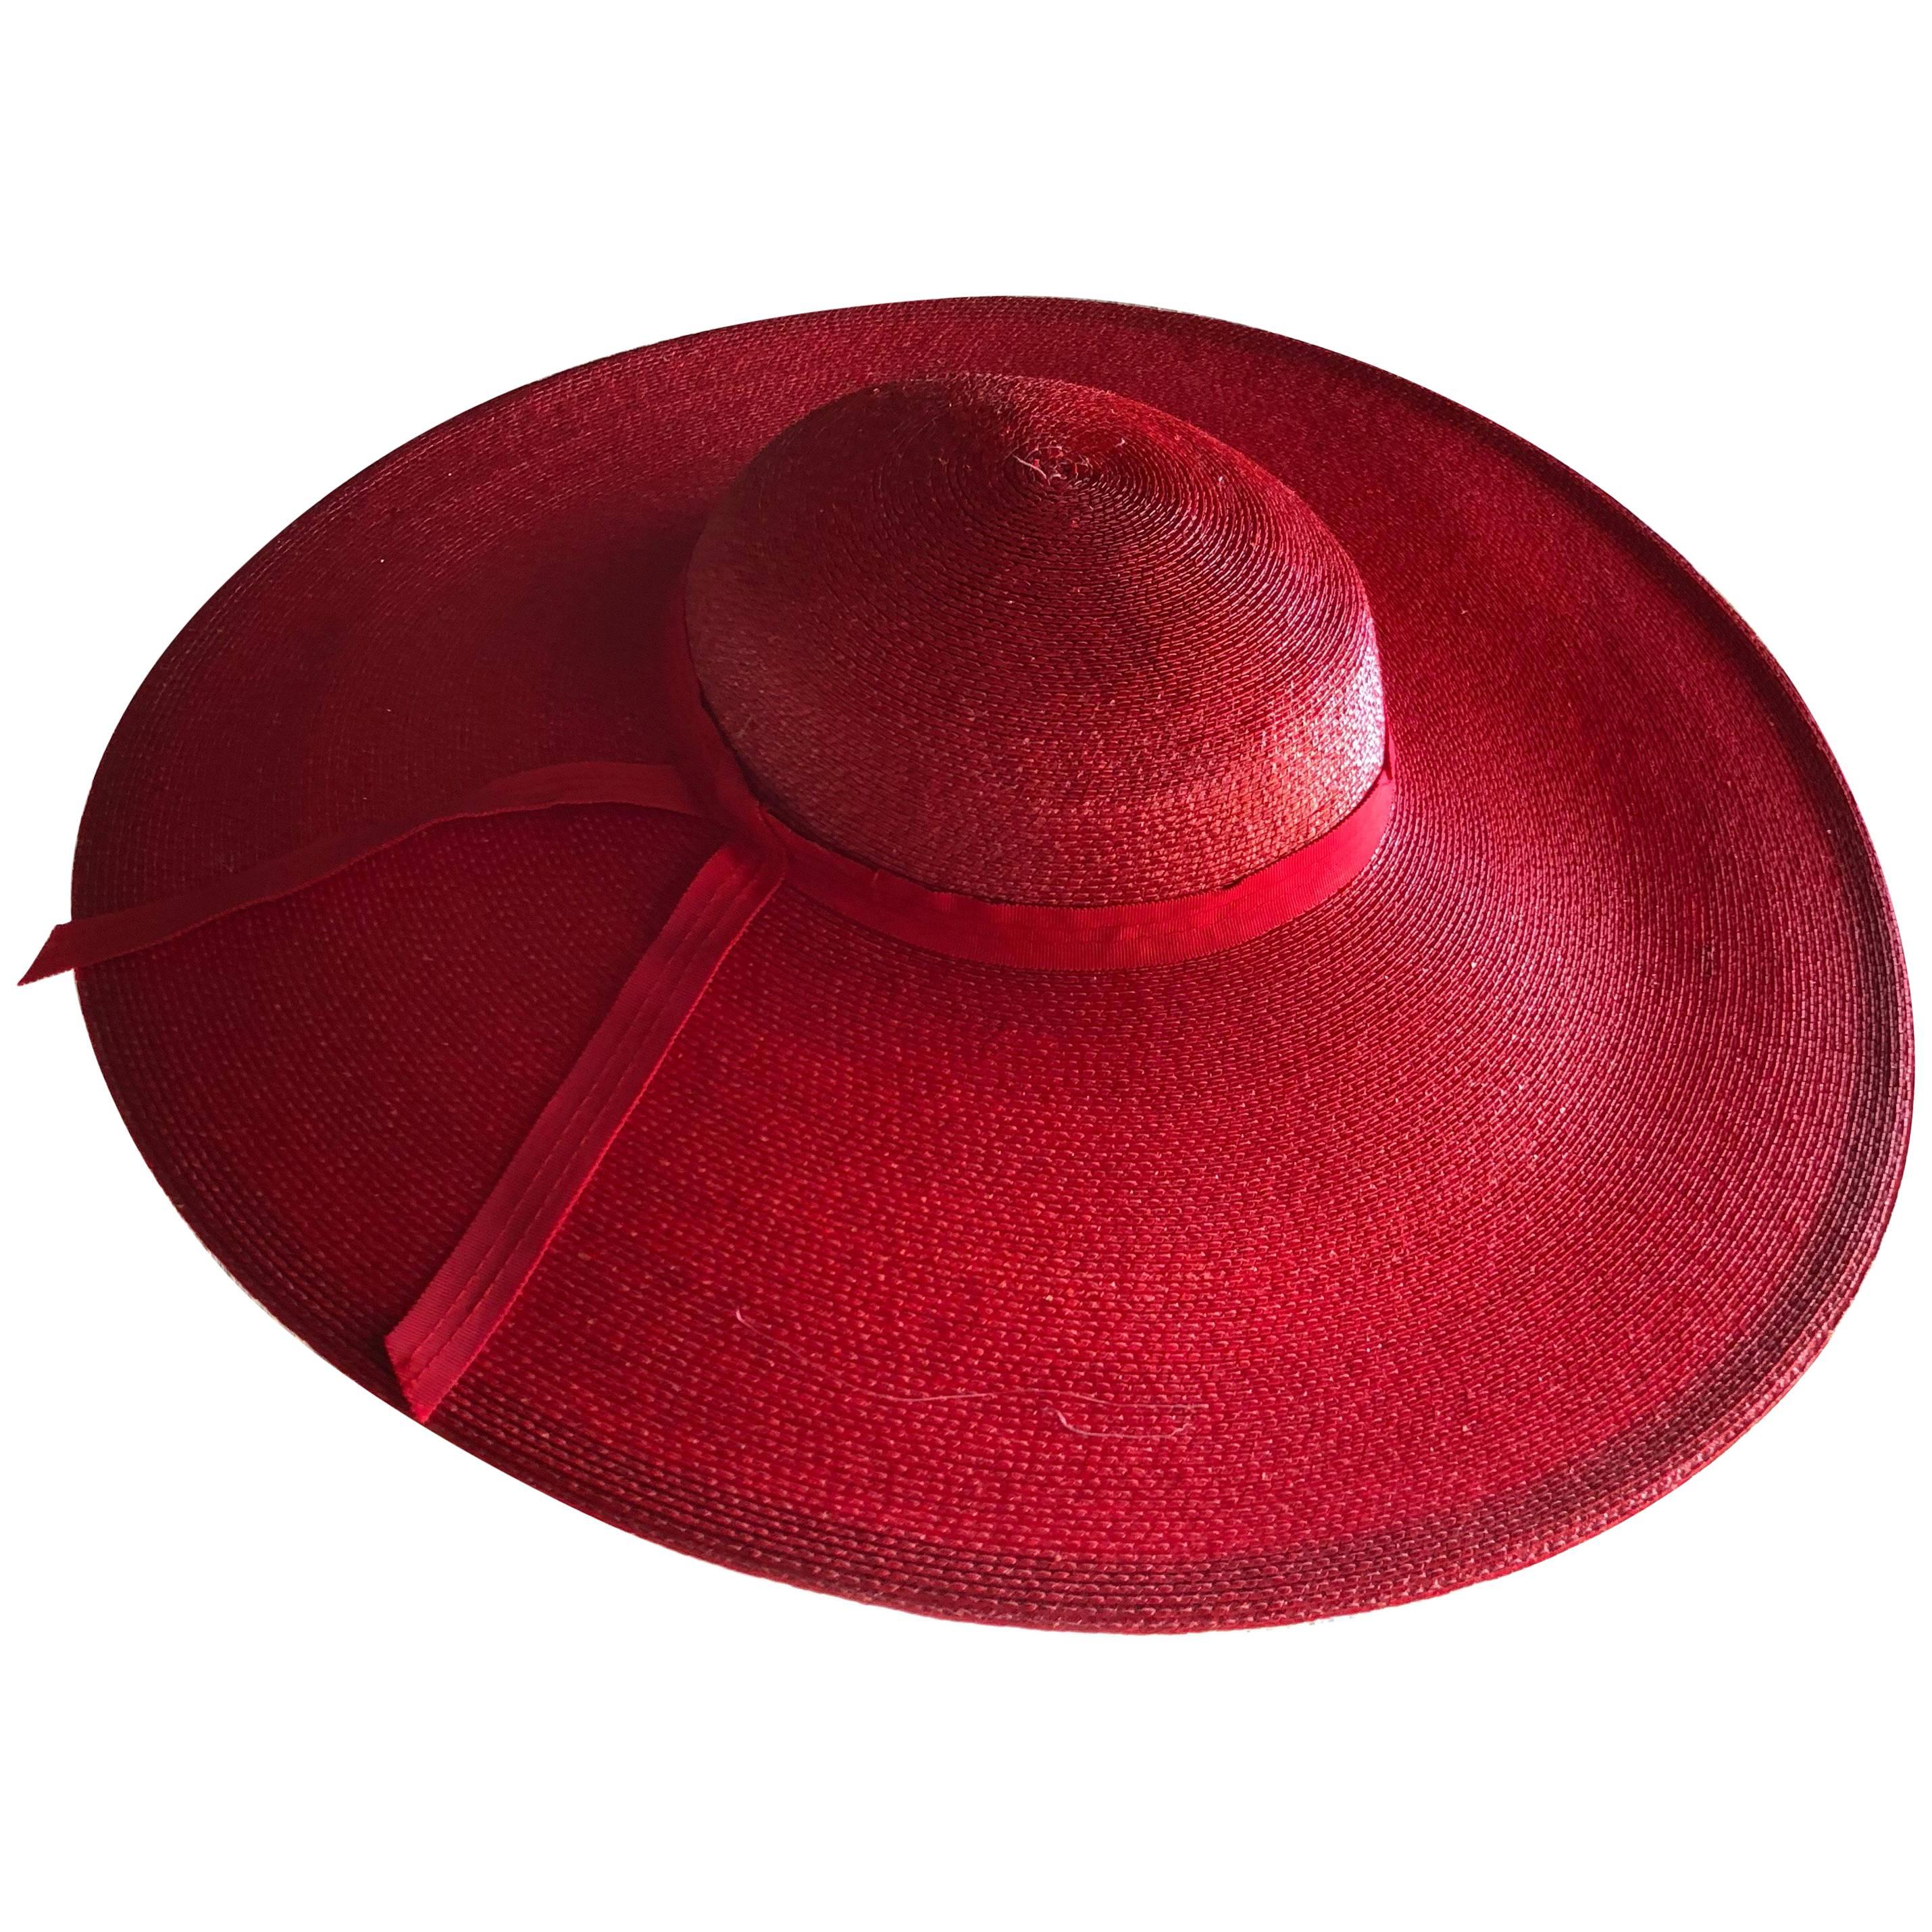 Bellini Original Red Milanese Straw Saucer-Shaped Hat, 1980s